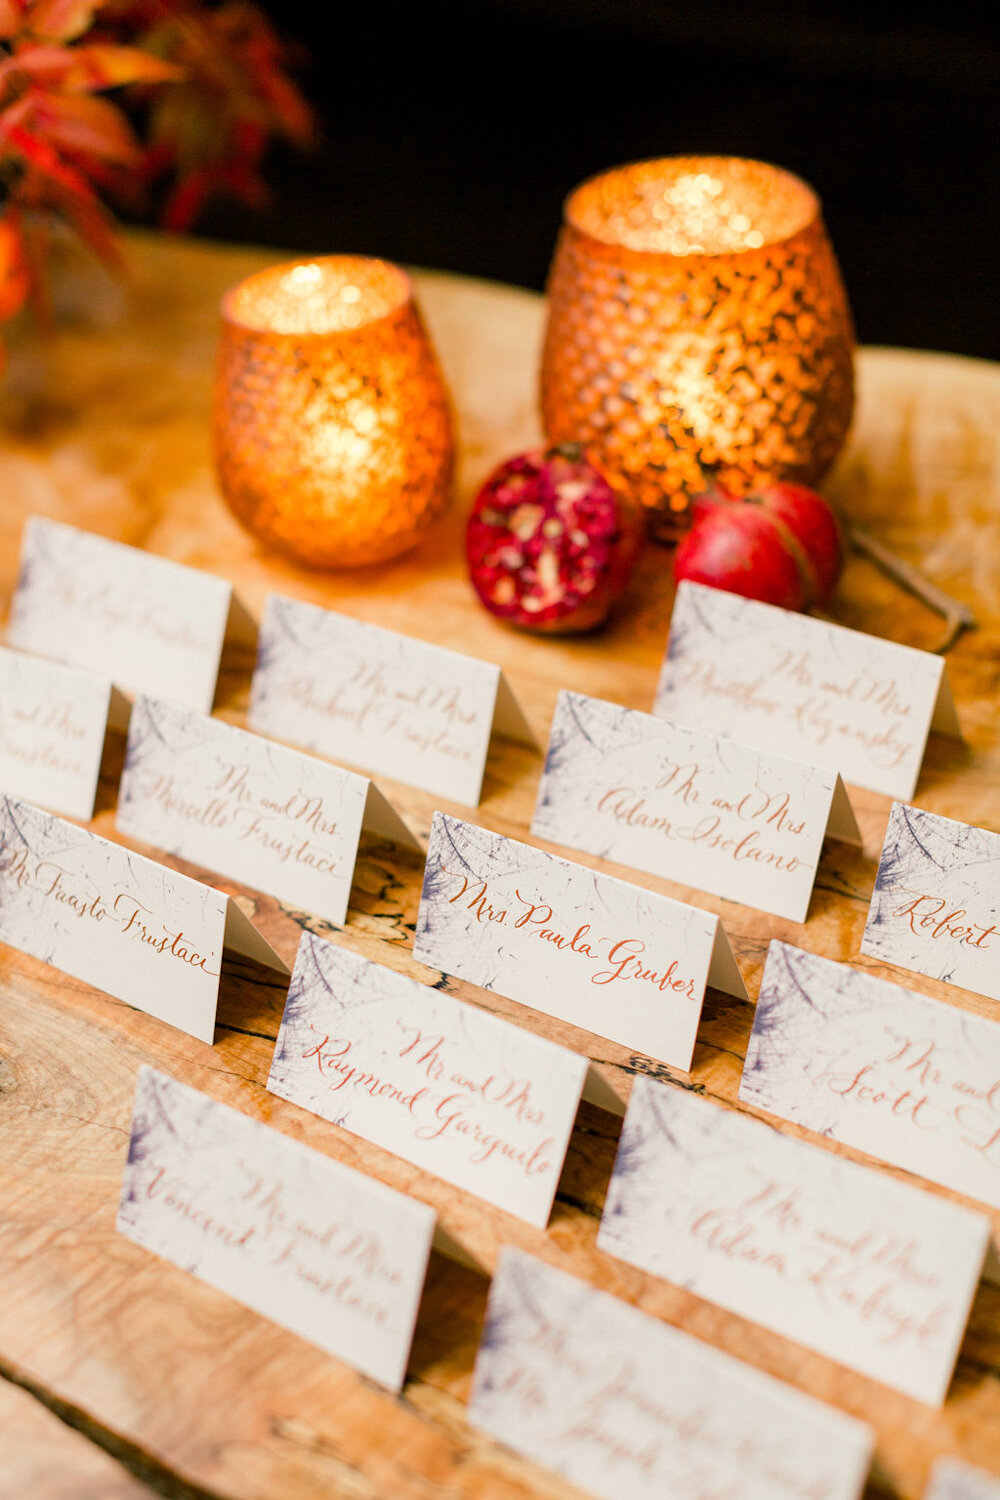 Blue Hill at Stone Barns wedding escort cards and candles